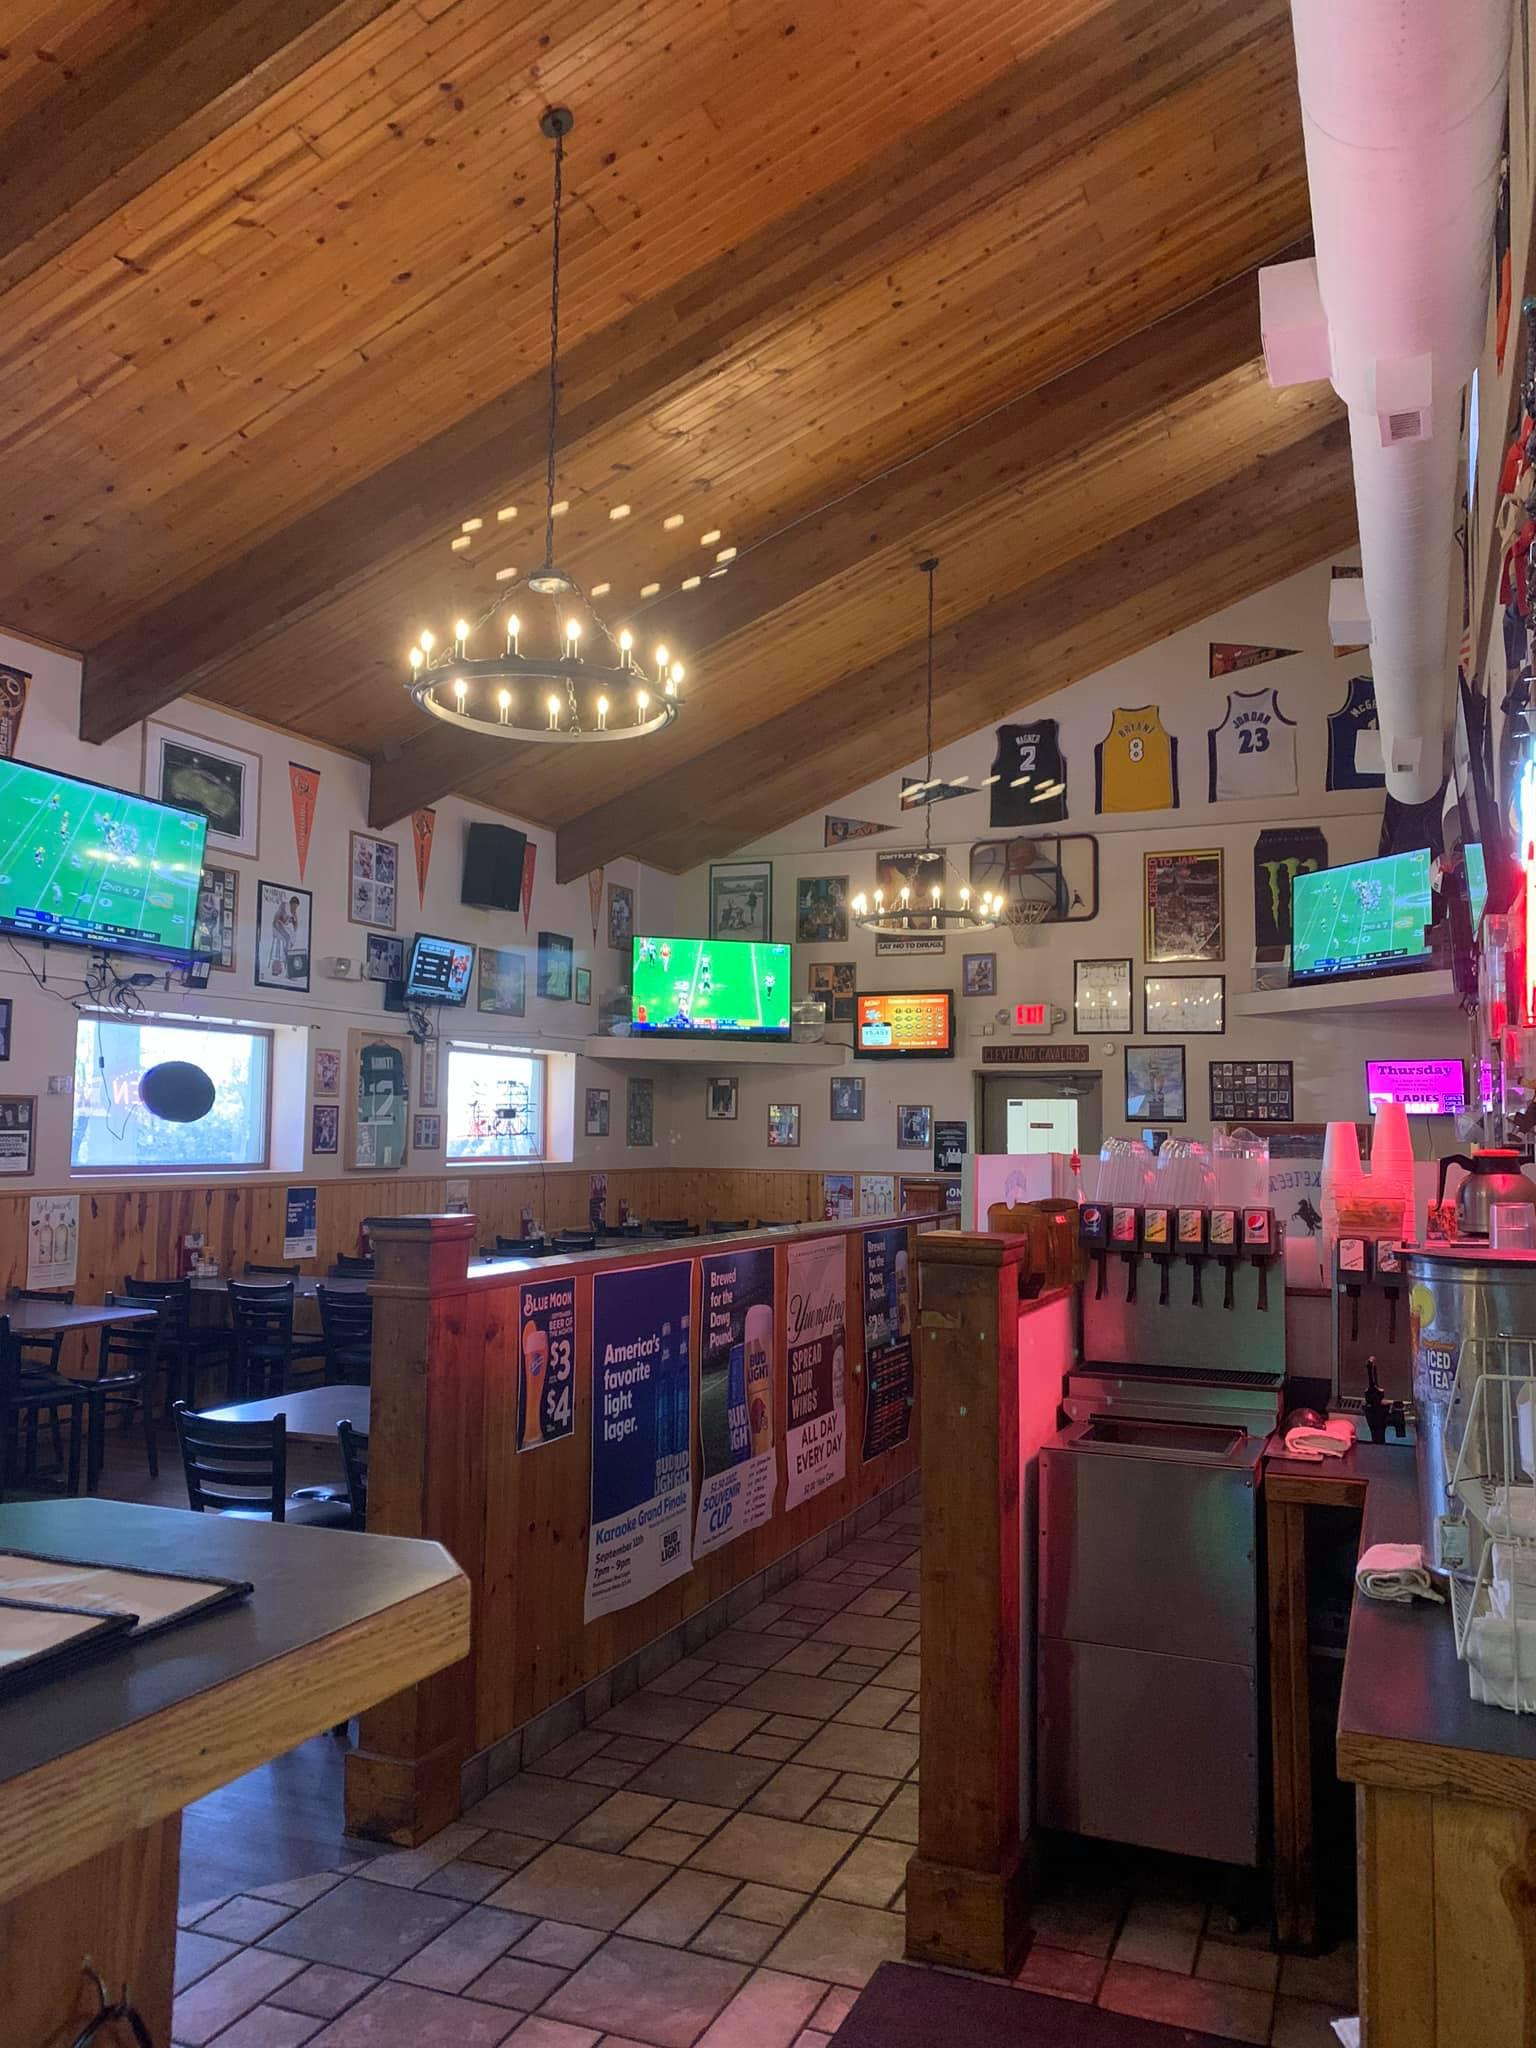 Looking for a place to enjoy pizza, chicken wings and a cold brew, while watching sports on TV? At Musketeers Bar & Grill, you'll find delicious food, over 100 beers, a full bar, and Ohio sports.
Known for our legendary pizza and jumbo wings, we take bar food to the next level! We make everything from scratch, including our savory pizza sauce and more than a dozen zesty chicken wing sauces. You won't find any bigger or tastier chicken wings in Northeast Ohio. We oven roast our wings then fry them for a crispy skin. Also on the menu are hearty sandwiches, like corned beef stacked high on toasted rye bread and gyro meat stuffed in a warm pita.

Beer rules at Musketeers.